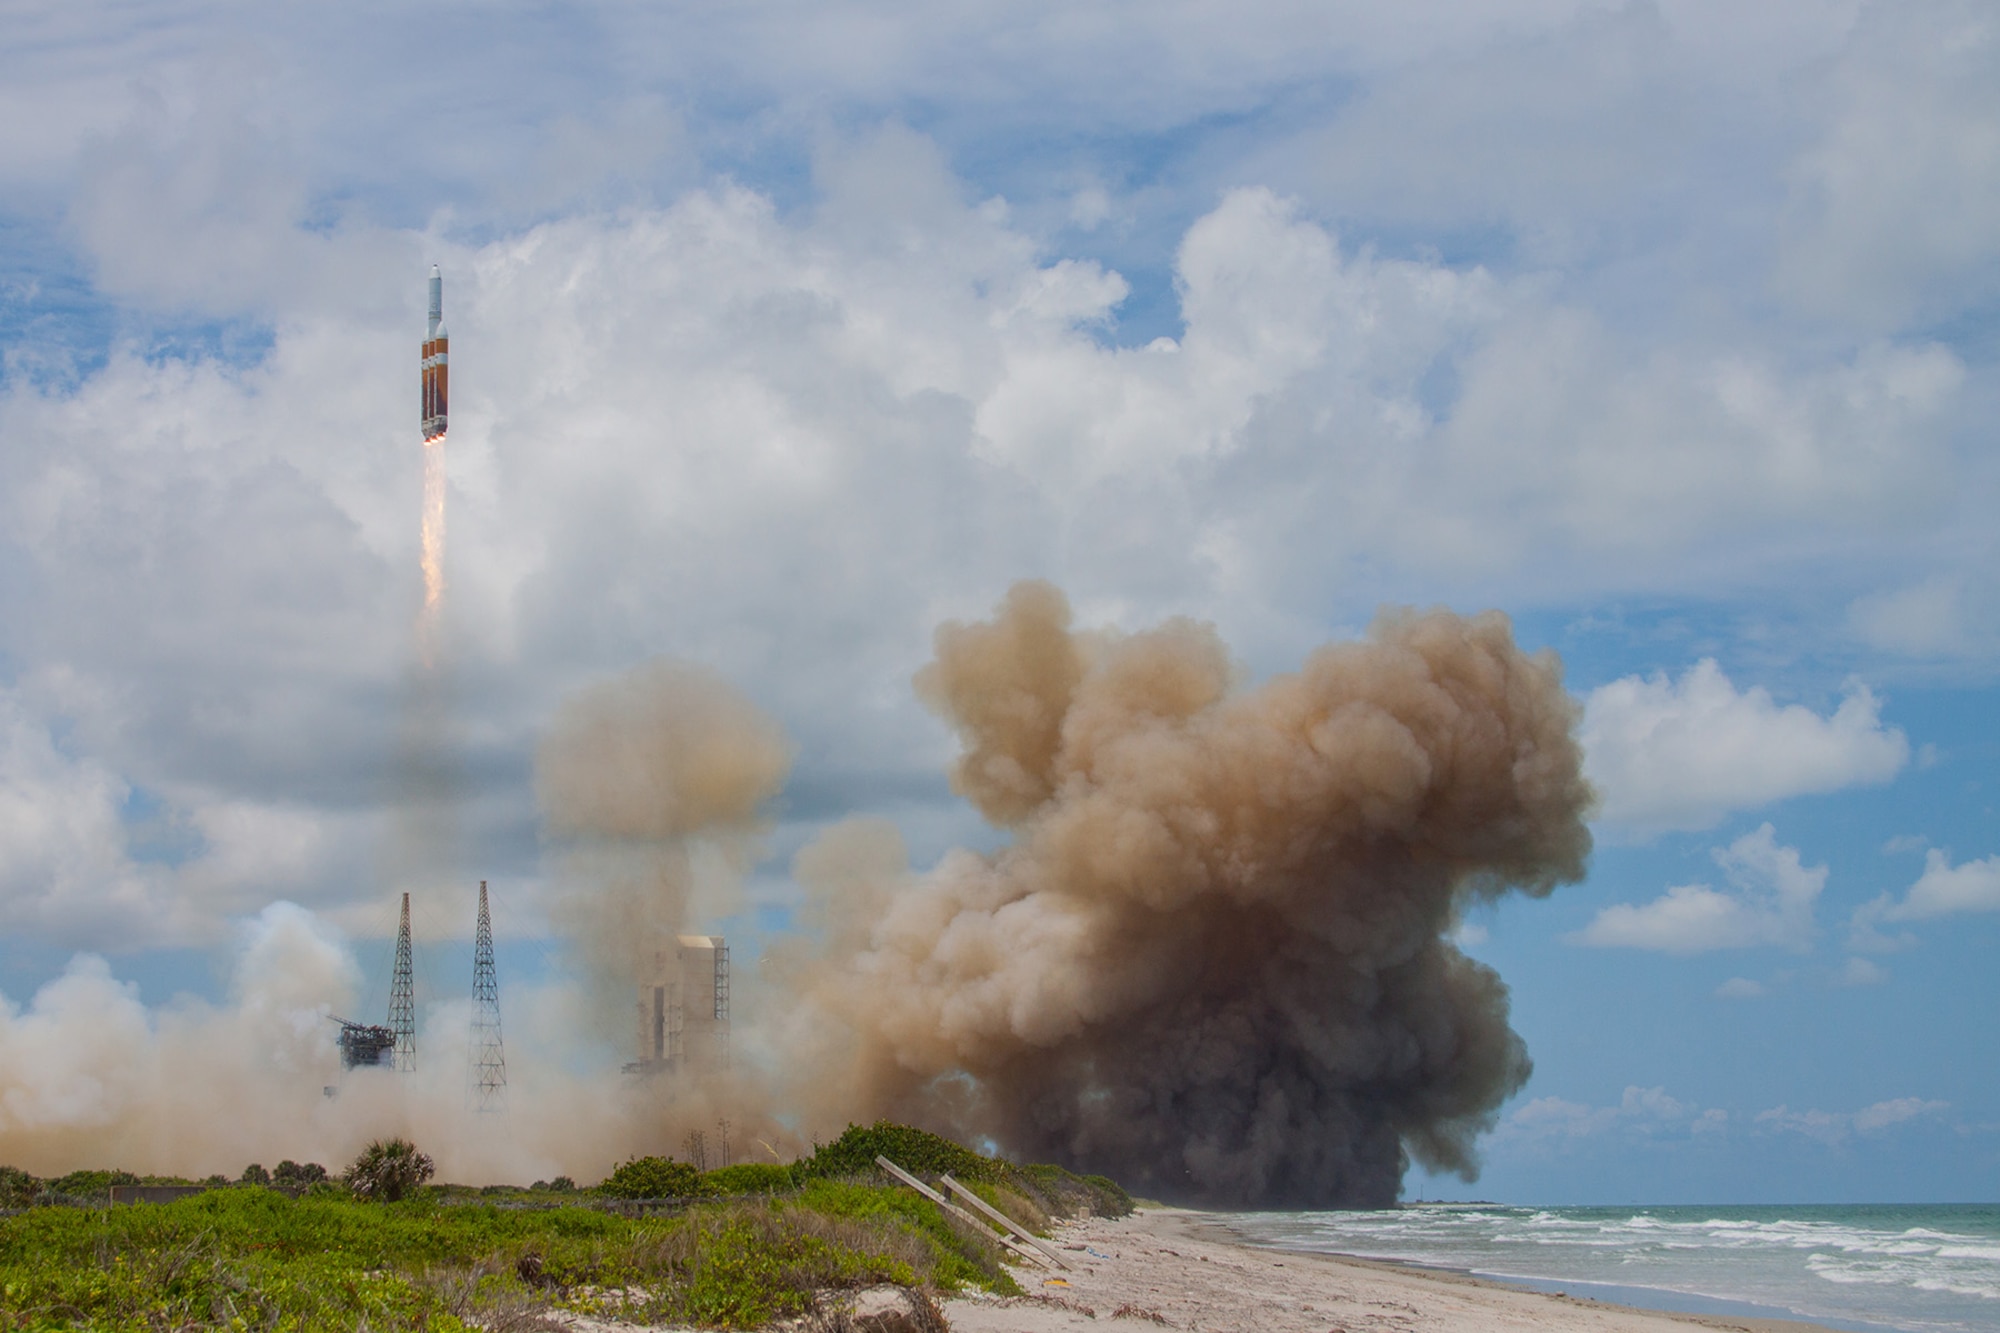 A United Launch Alliance Delta IV-Heavy rocket lifts off from Space Launch Complex 37B at Cape Canaveral Air Force Station, Florida, June 11, 2016, at 1:51 p.m. ET. The ULA Delta IV rocket carried a classified national security payload for the U.S. National Reconnaissance Office. (Courtesy photo by ULA)